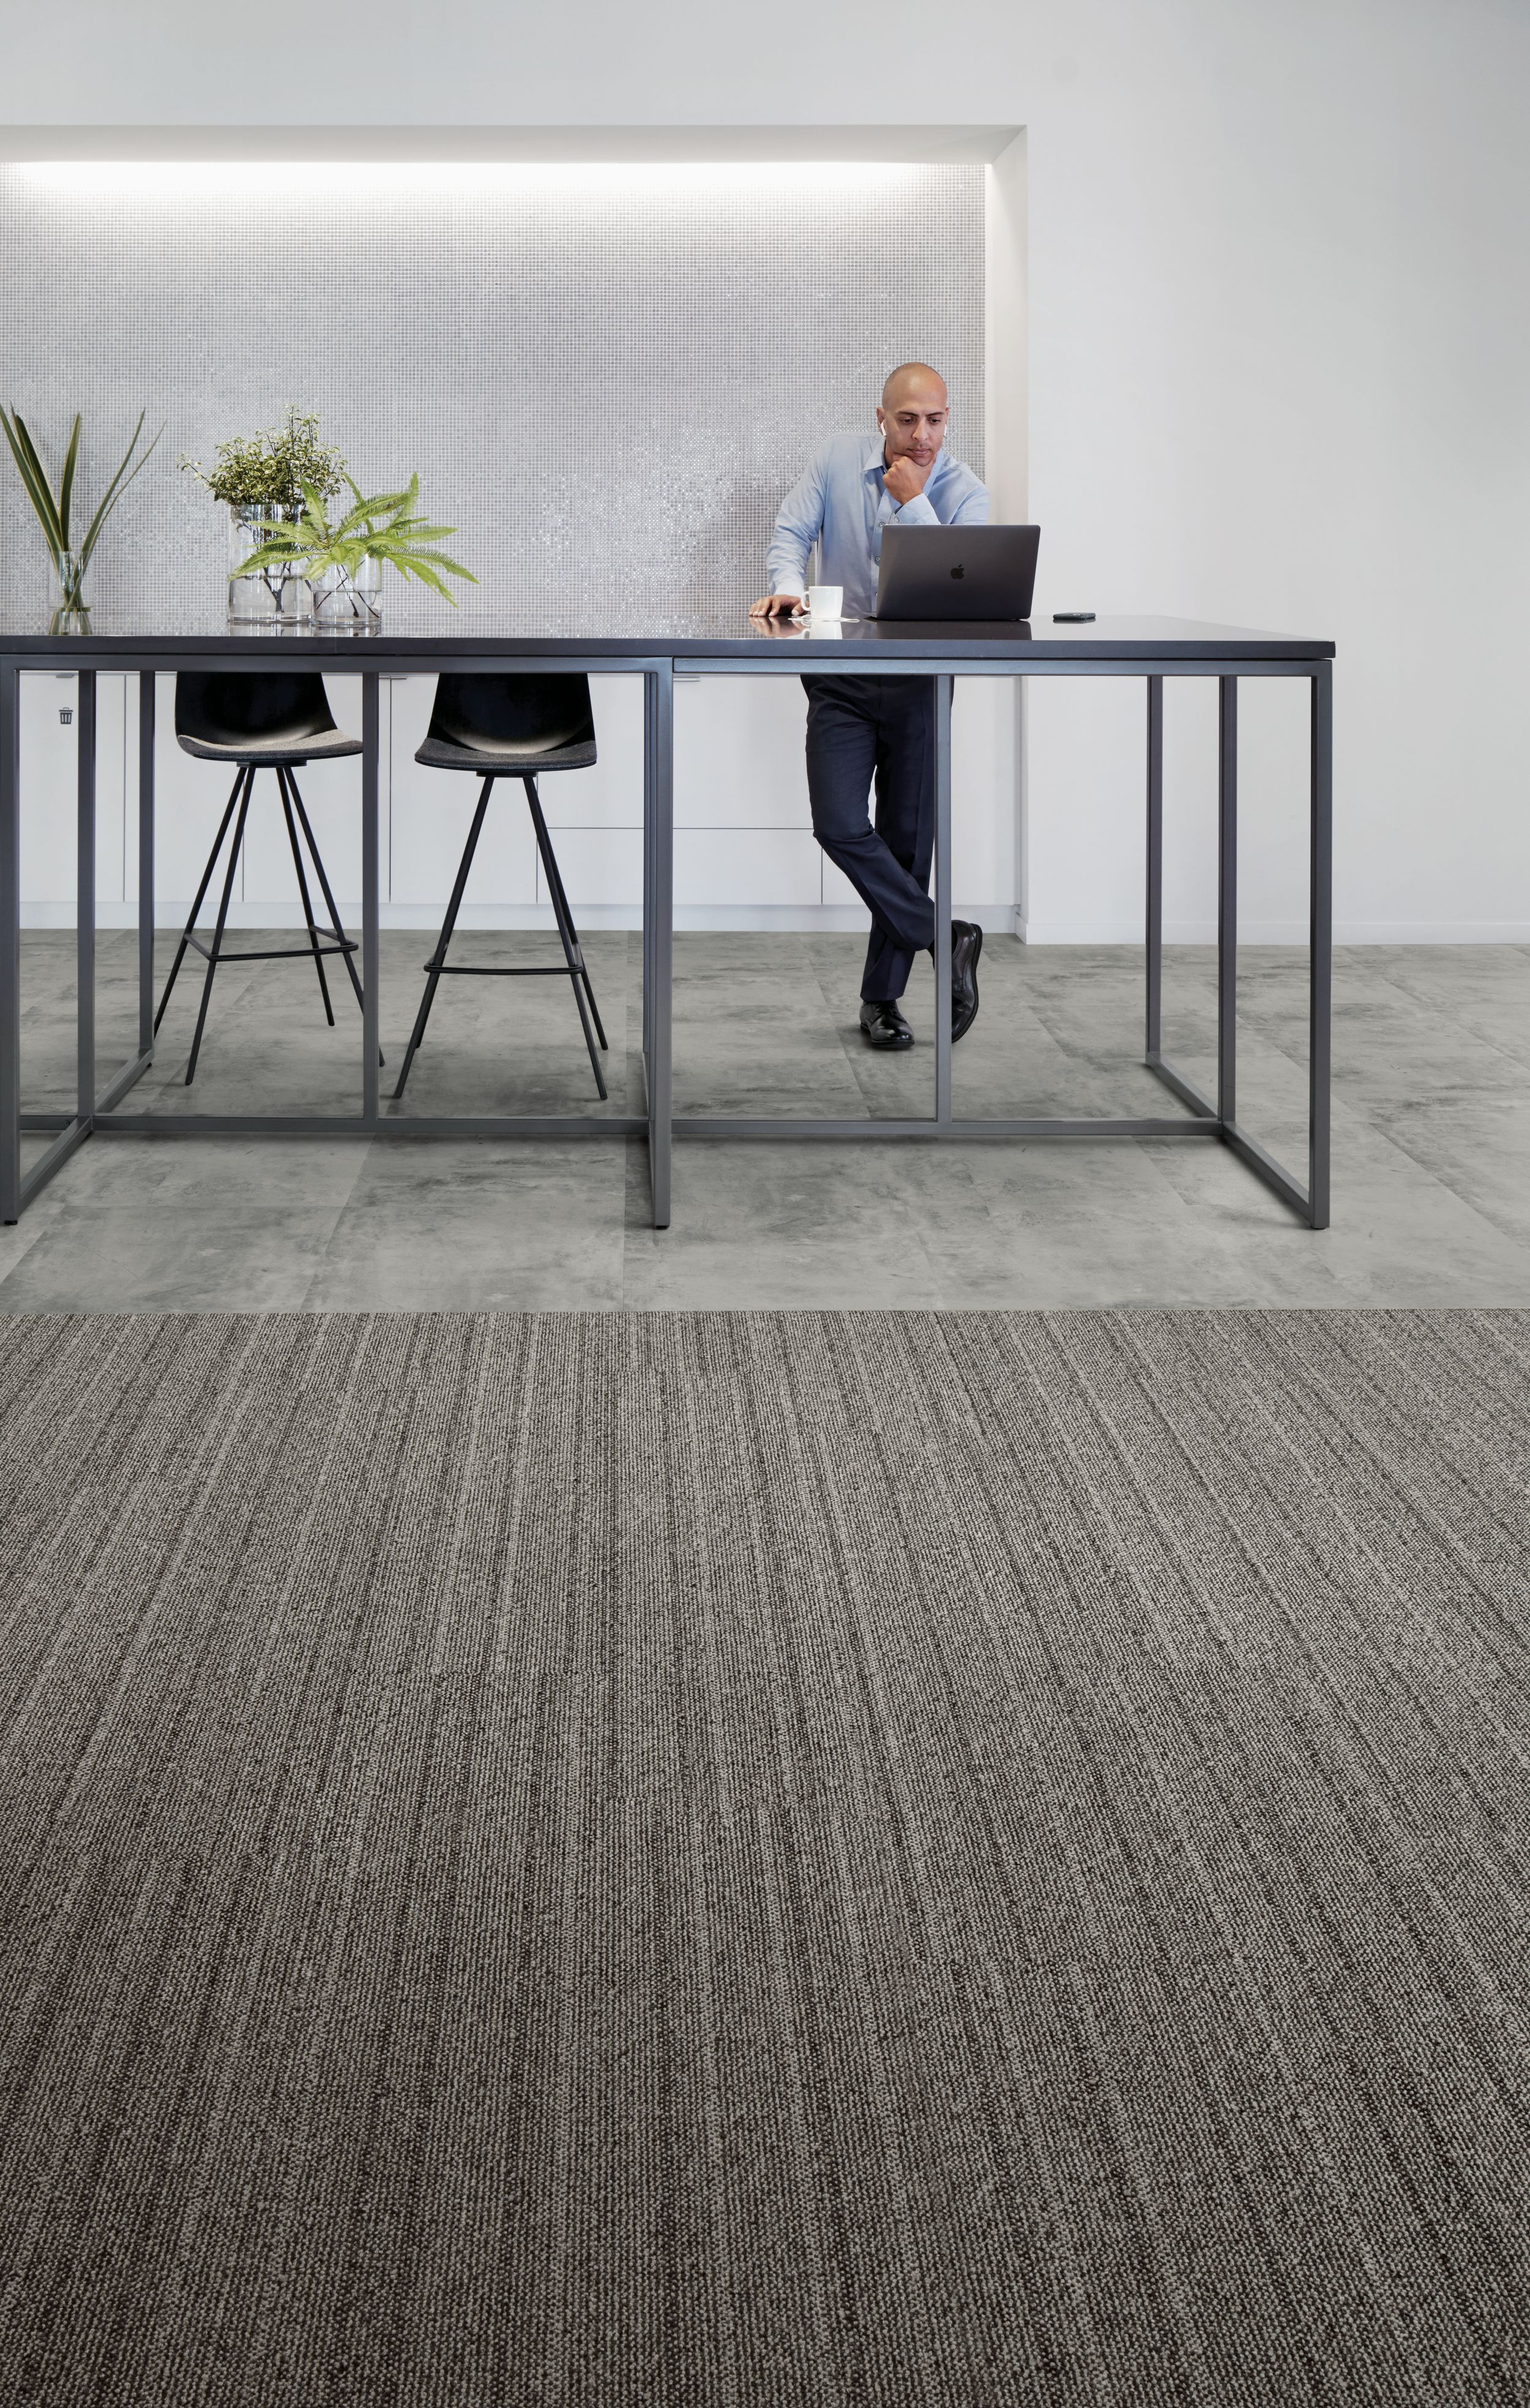 Interface WW860 plank carpet tile with Textured Stones LVT in office work space numéro d’image 4